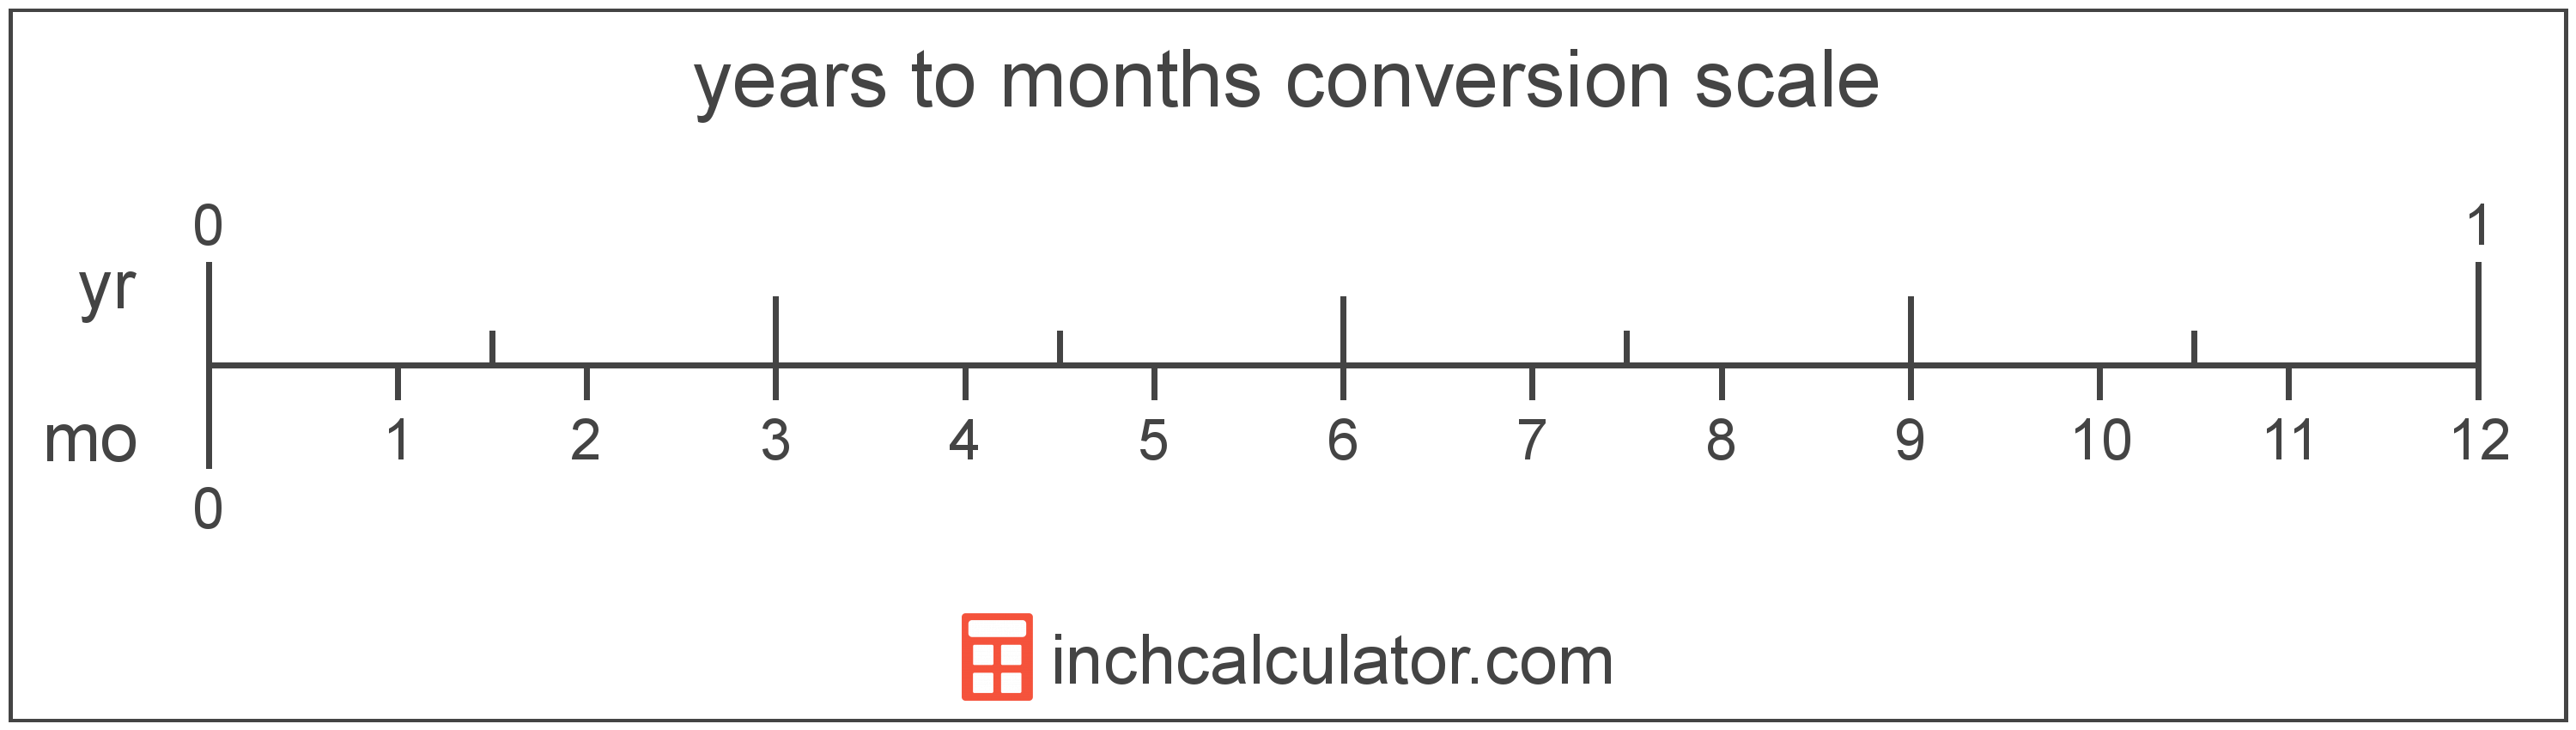 conversion scale showing years and equivalent months time values